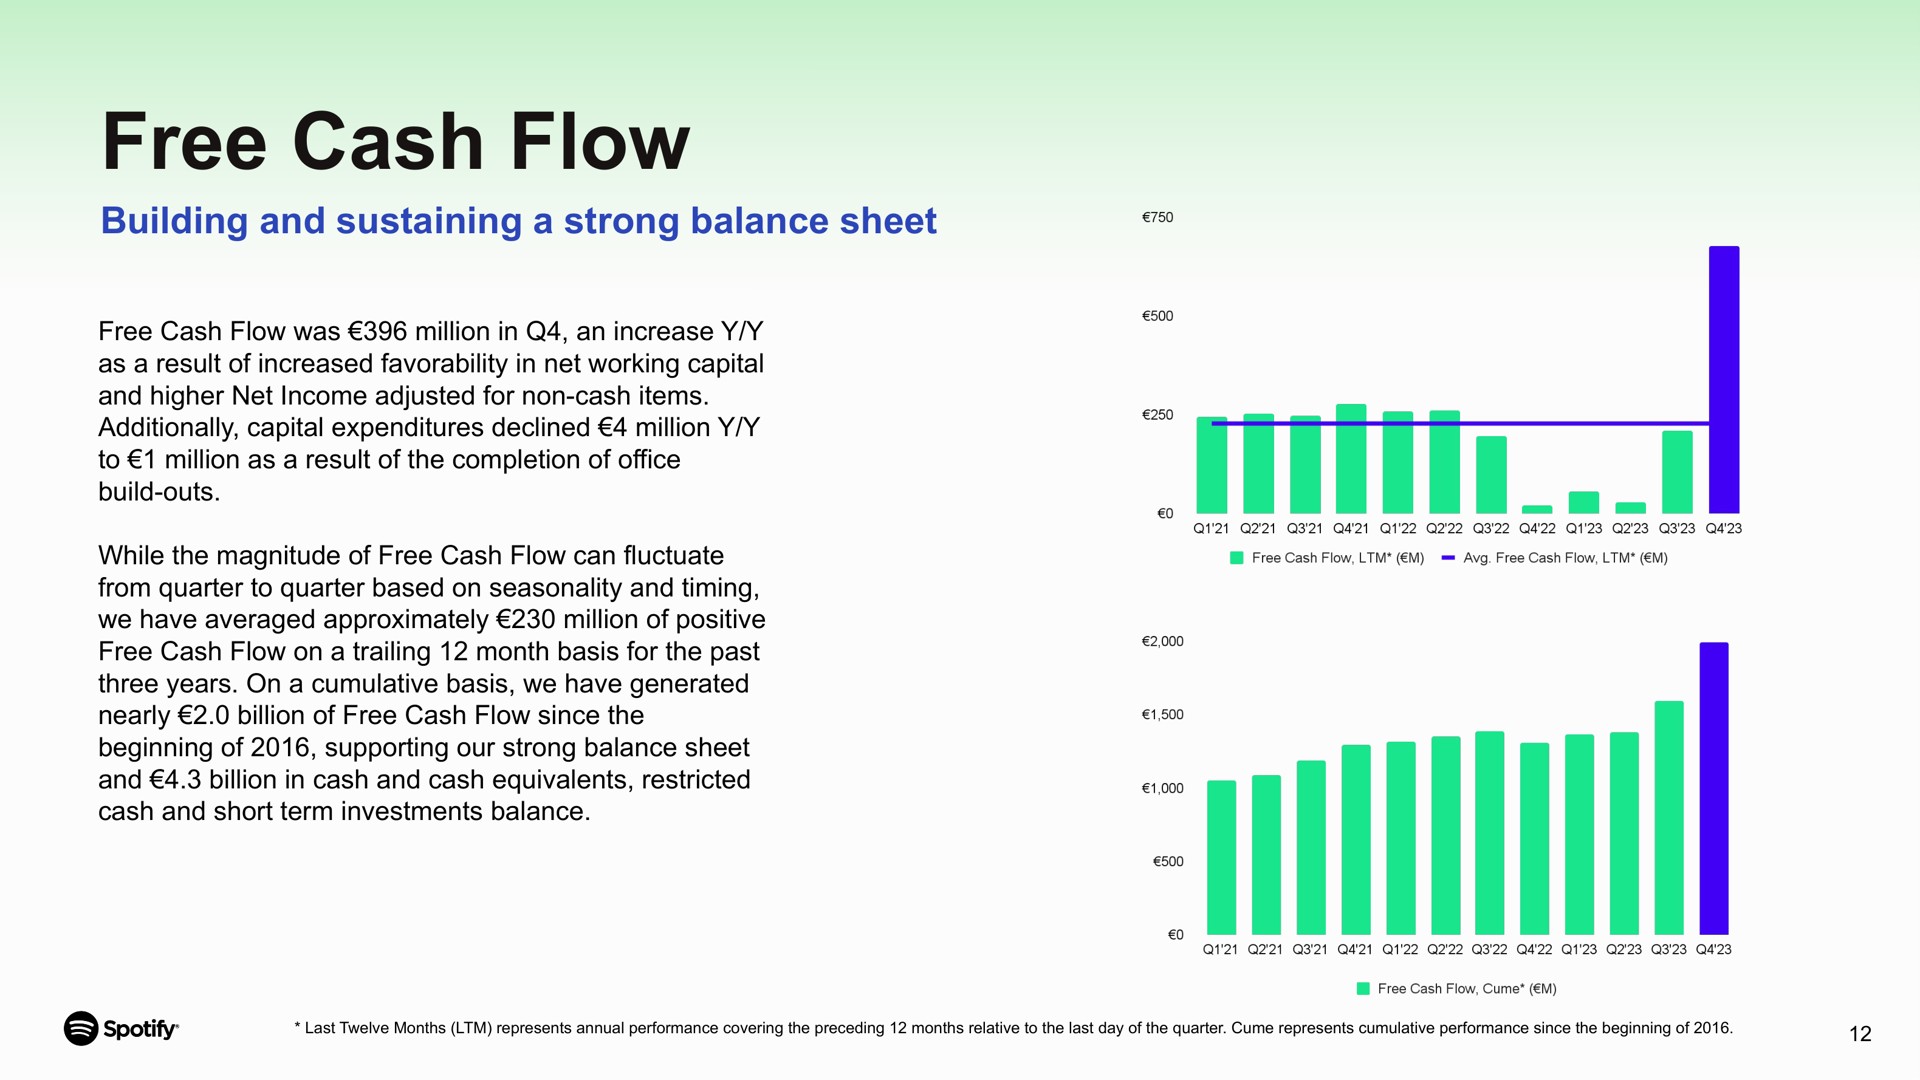 free cash flow building and sustaining a strong balance sheet was million in an increase as result of increased in net working capital higher net income adjusted for non cash items additionally capital expenditures declined million to million as result of the completion of office build outs while the magnitude of can fluctuate from quarter to quarter based on seasonality timing we have averaged approximately million of positive on trailing month basis for the past three years on cumulative basis we have generated nearly billion of since the beginning of supporting our billion in equivalents restricted short term investments | Spotify